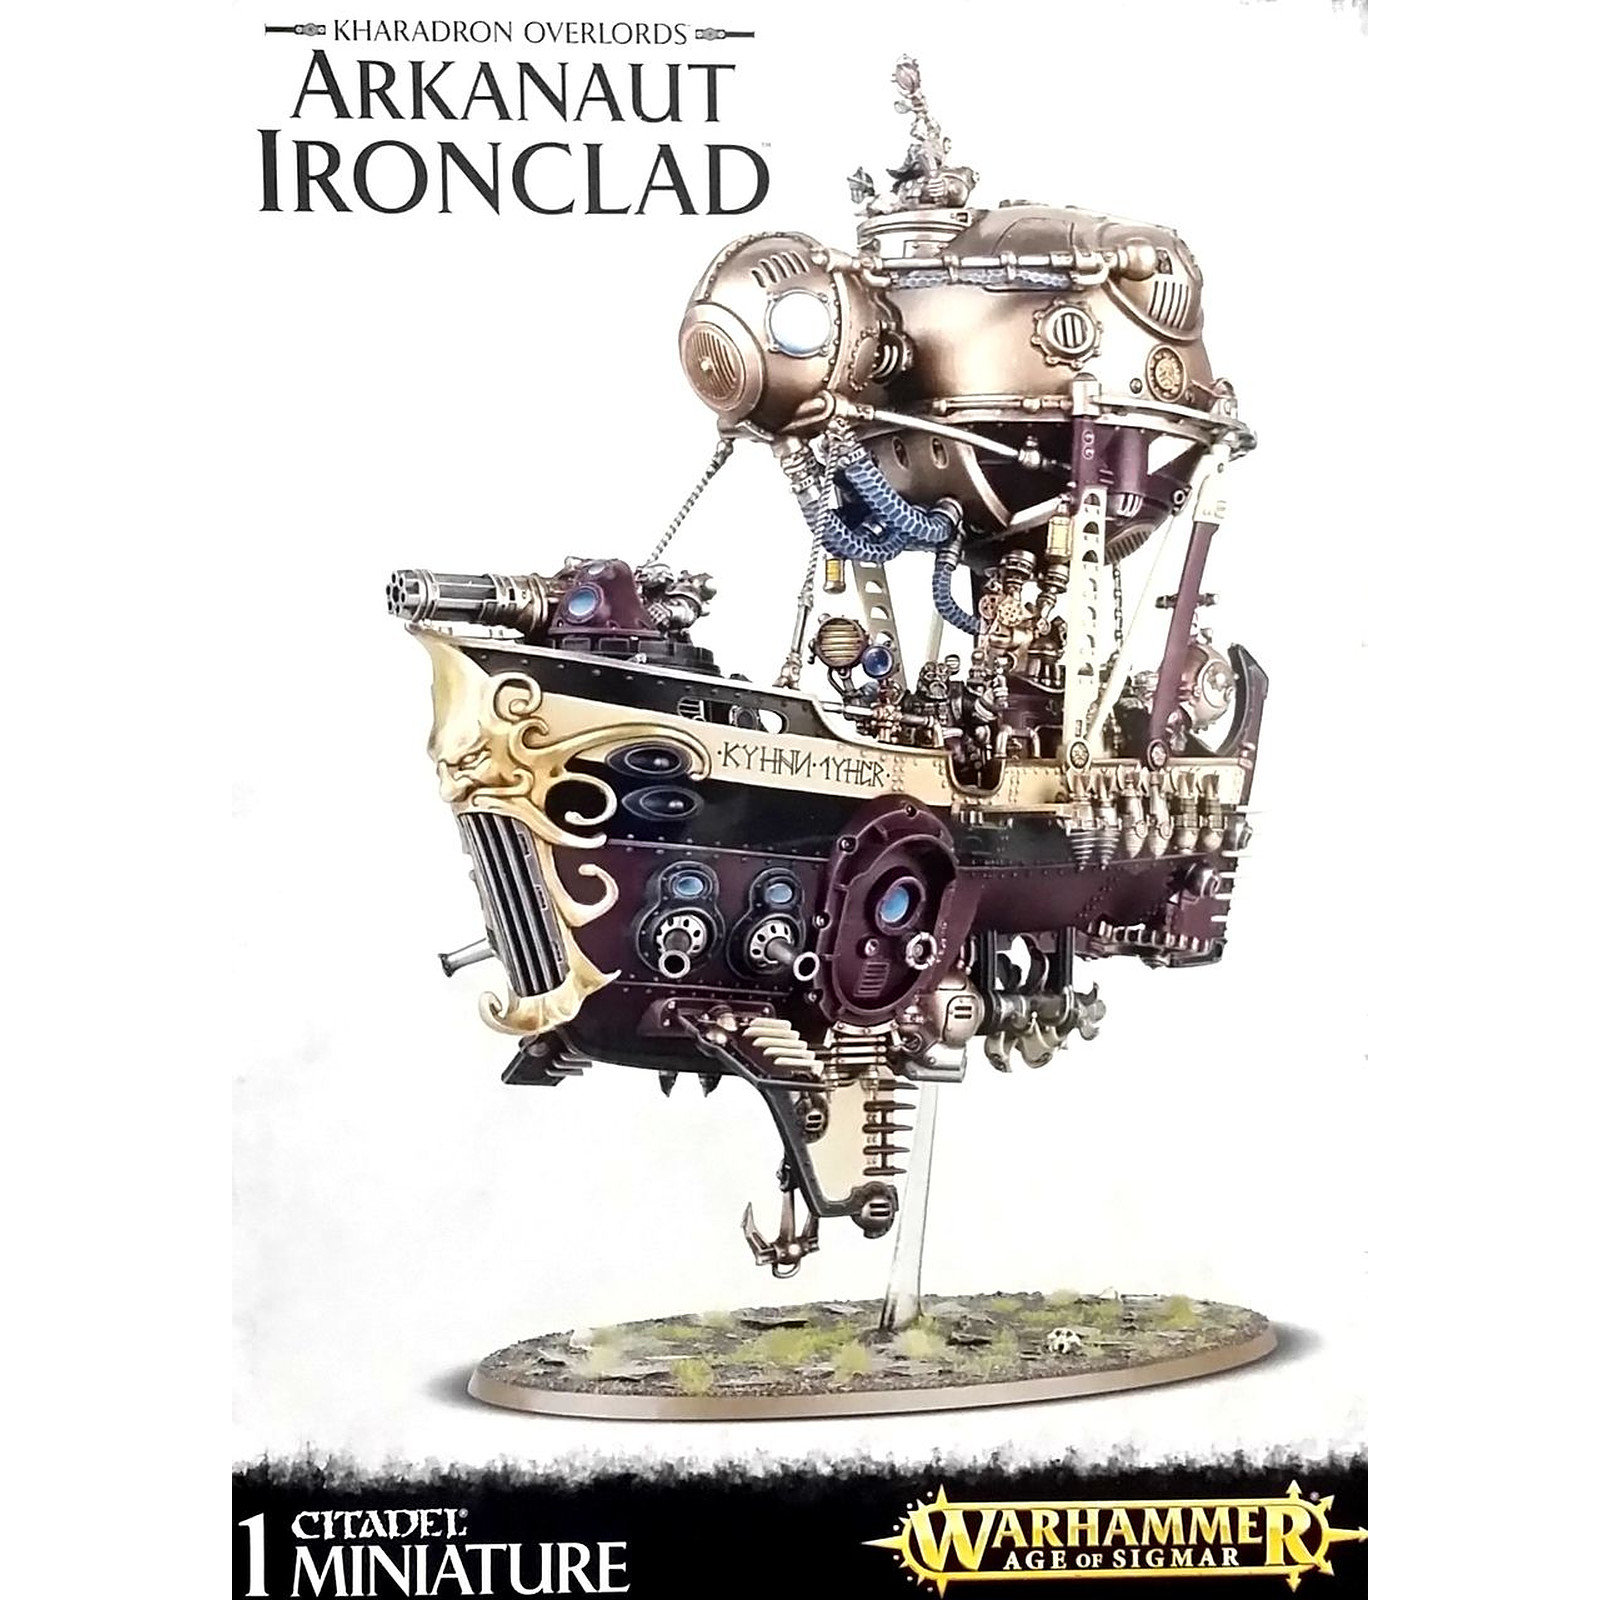 Warhammer AoS - Kharadron Overlords Arkanaut Ironclad - Jeux de figurines Games workshop